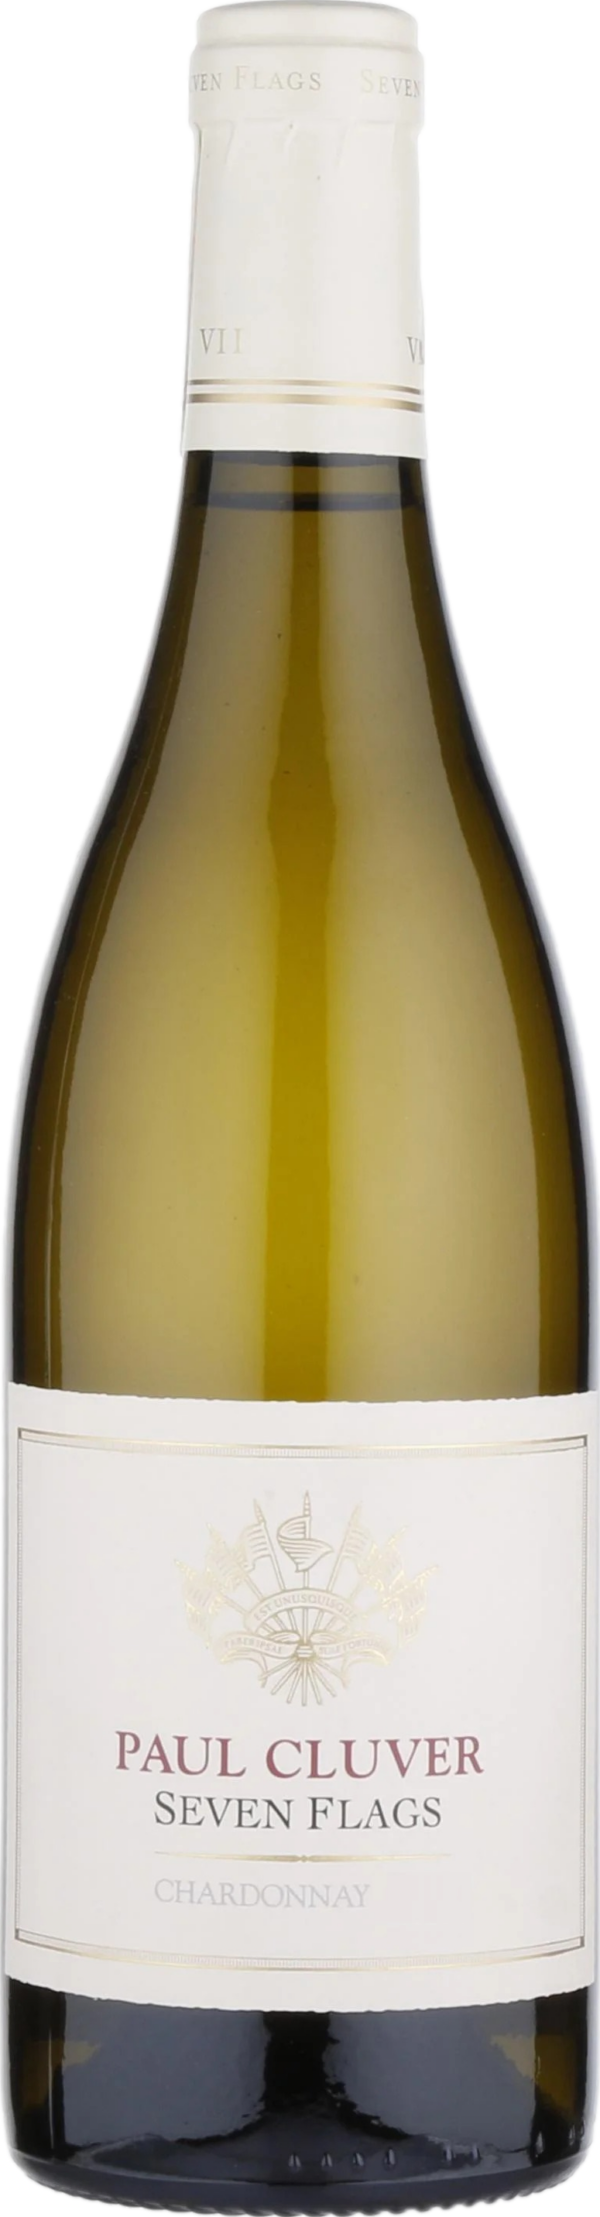 Product image of Paul Cluver Seven Flags Chardonnay 2018 from 8wines